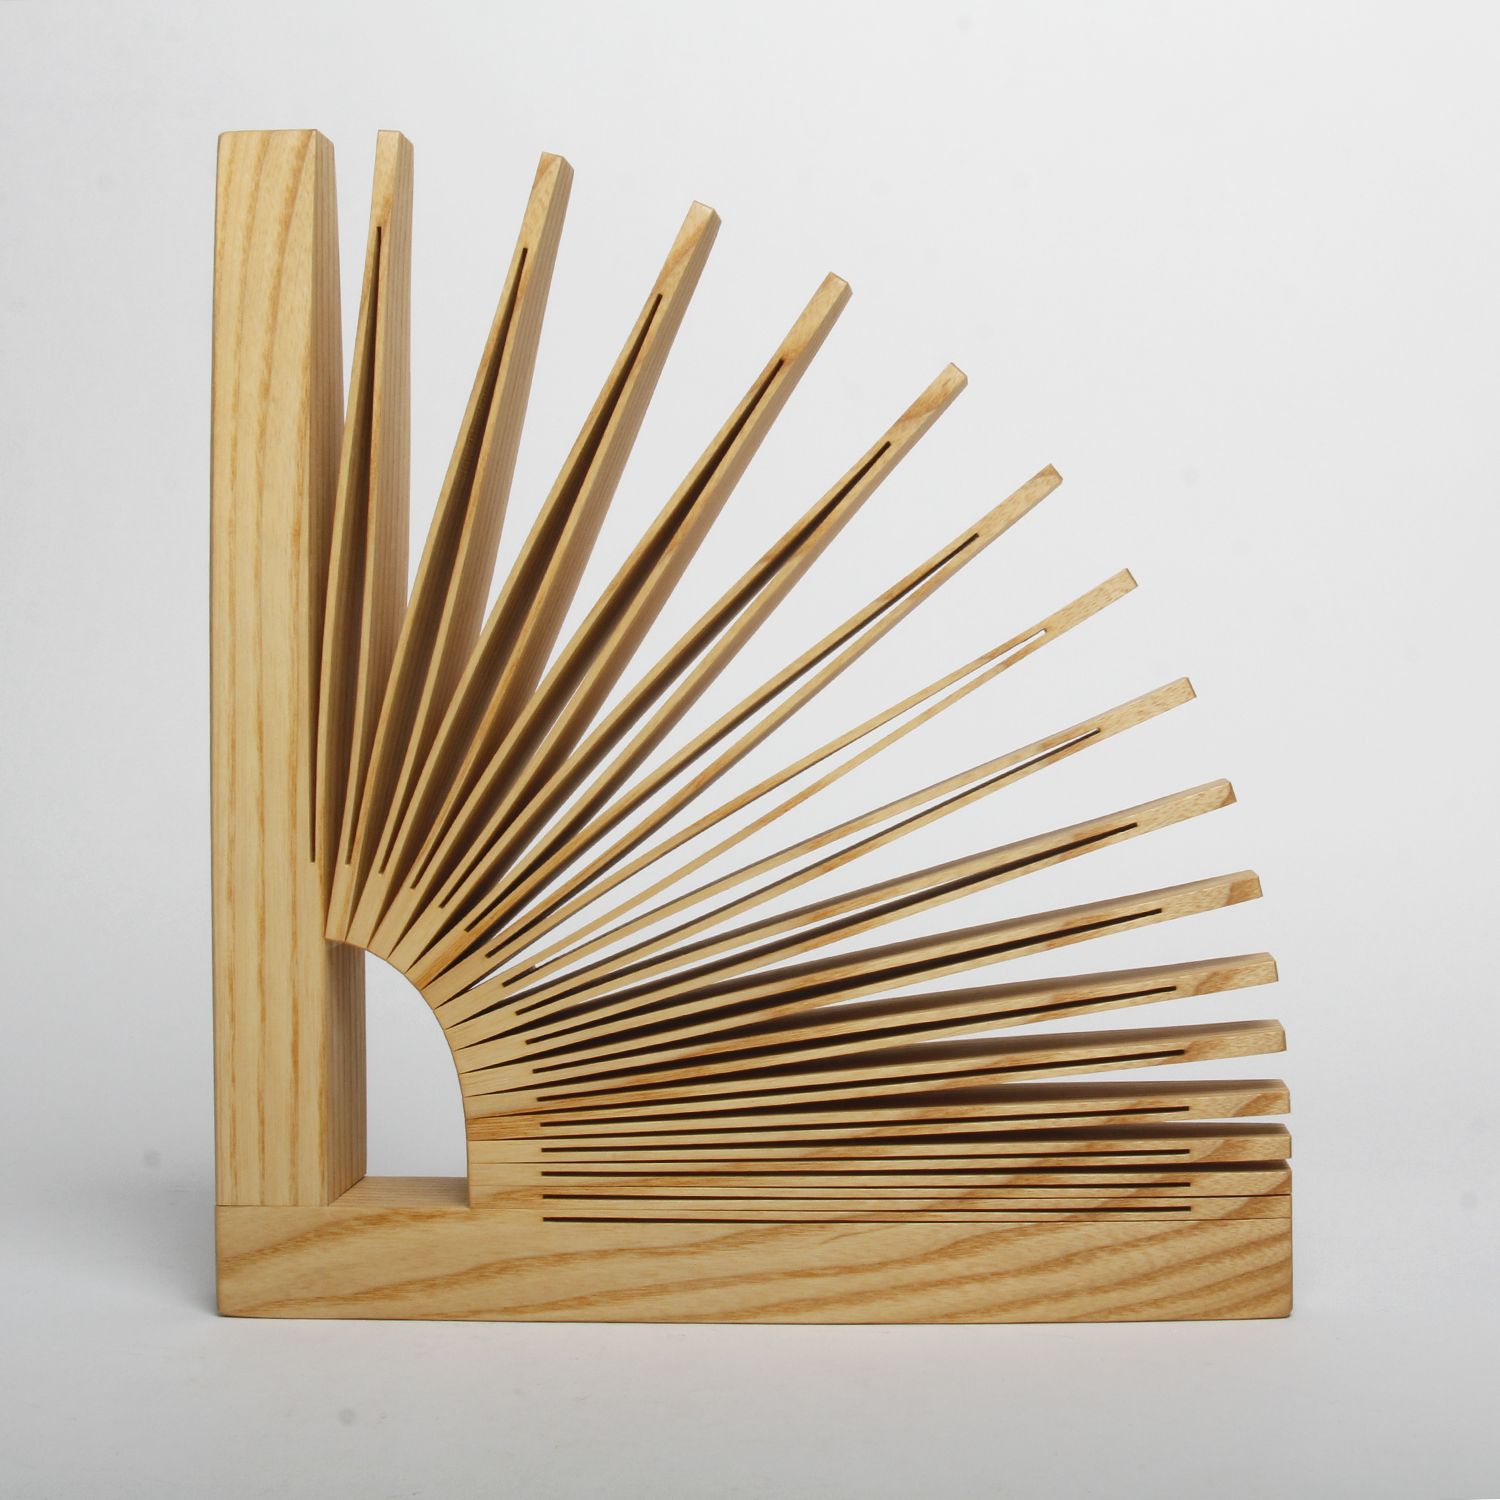 Seth Rolland: Bookends (Each pair sold separately) Product Image 2 of 4